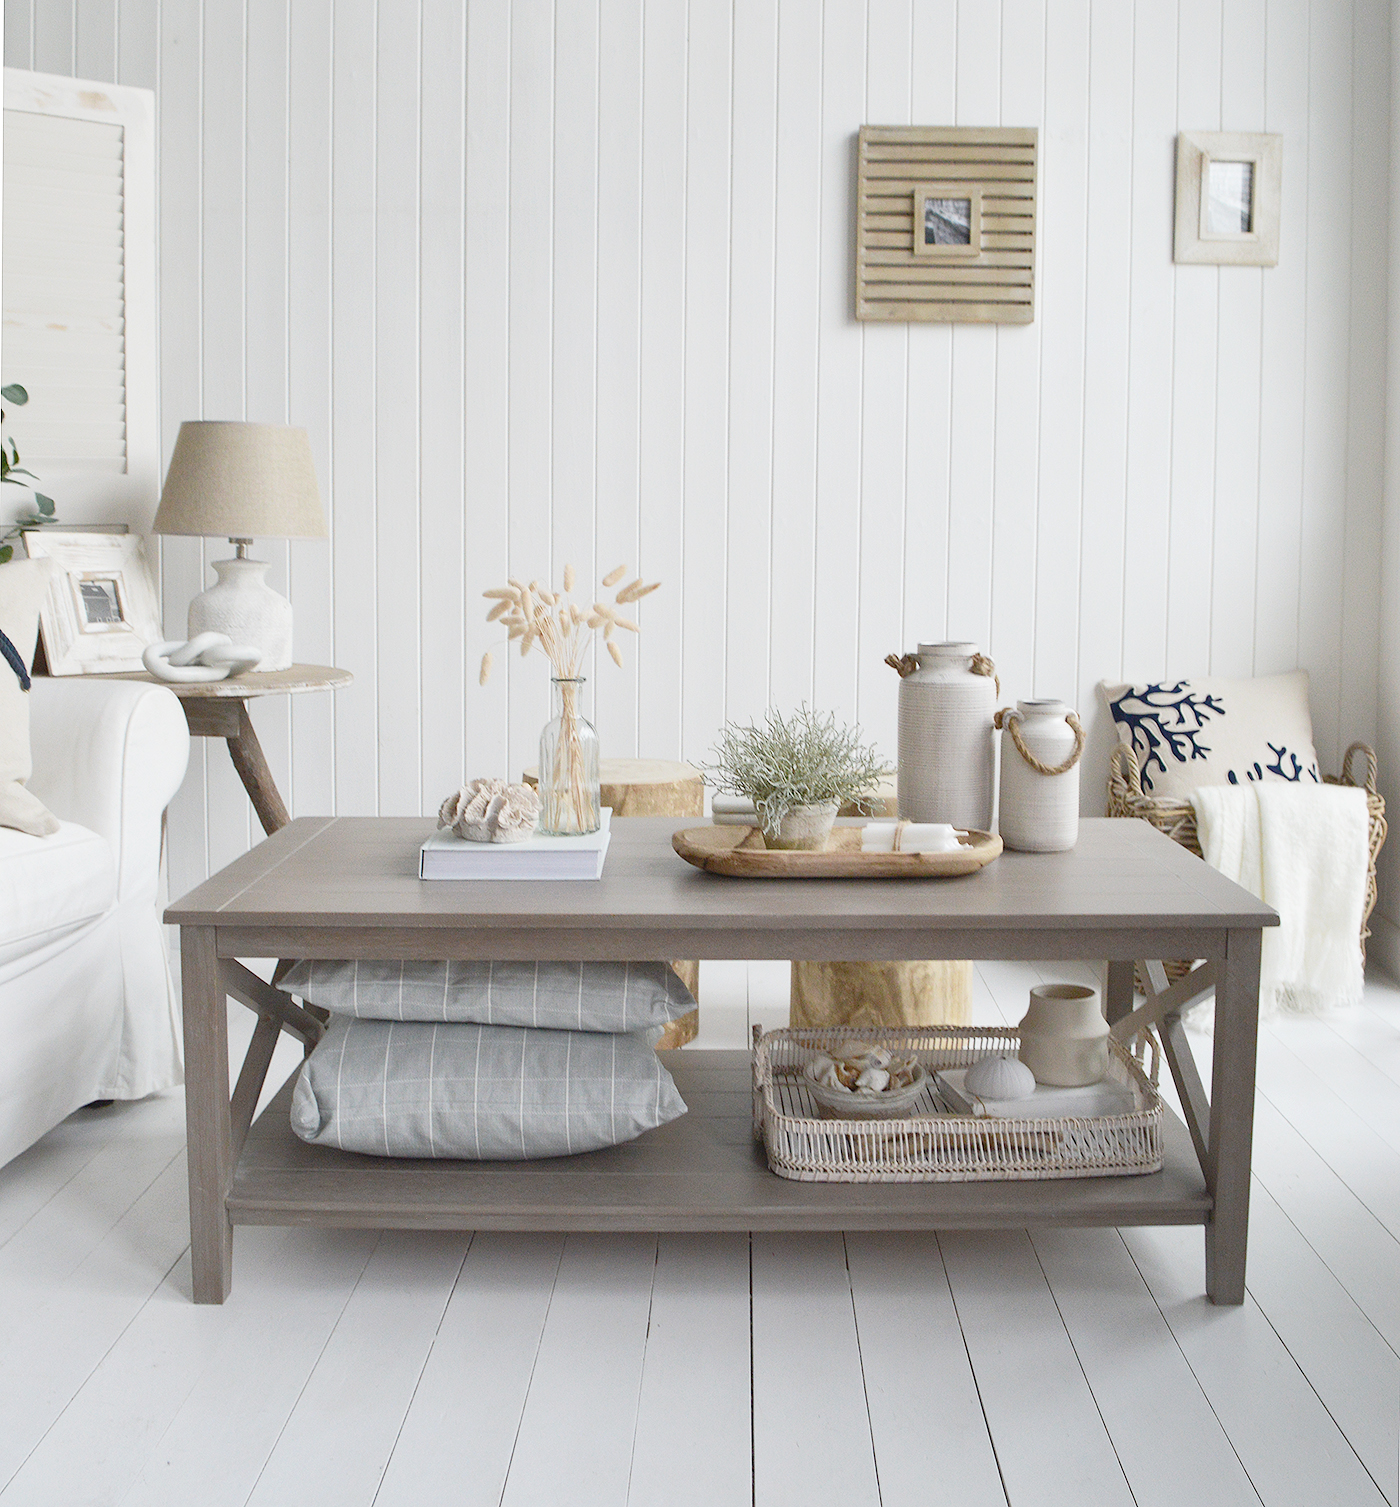 Hamtons chic coastal furniture - The Cambridge Coffee Table shown with the Ascot wooden stools and ideas on coffee table styling and decor